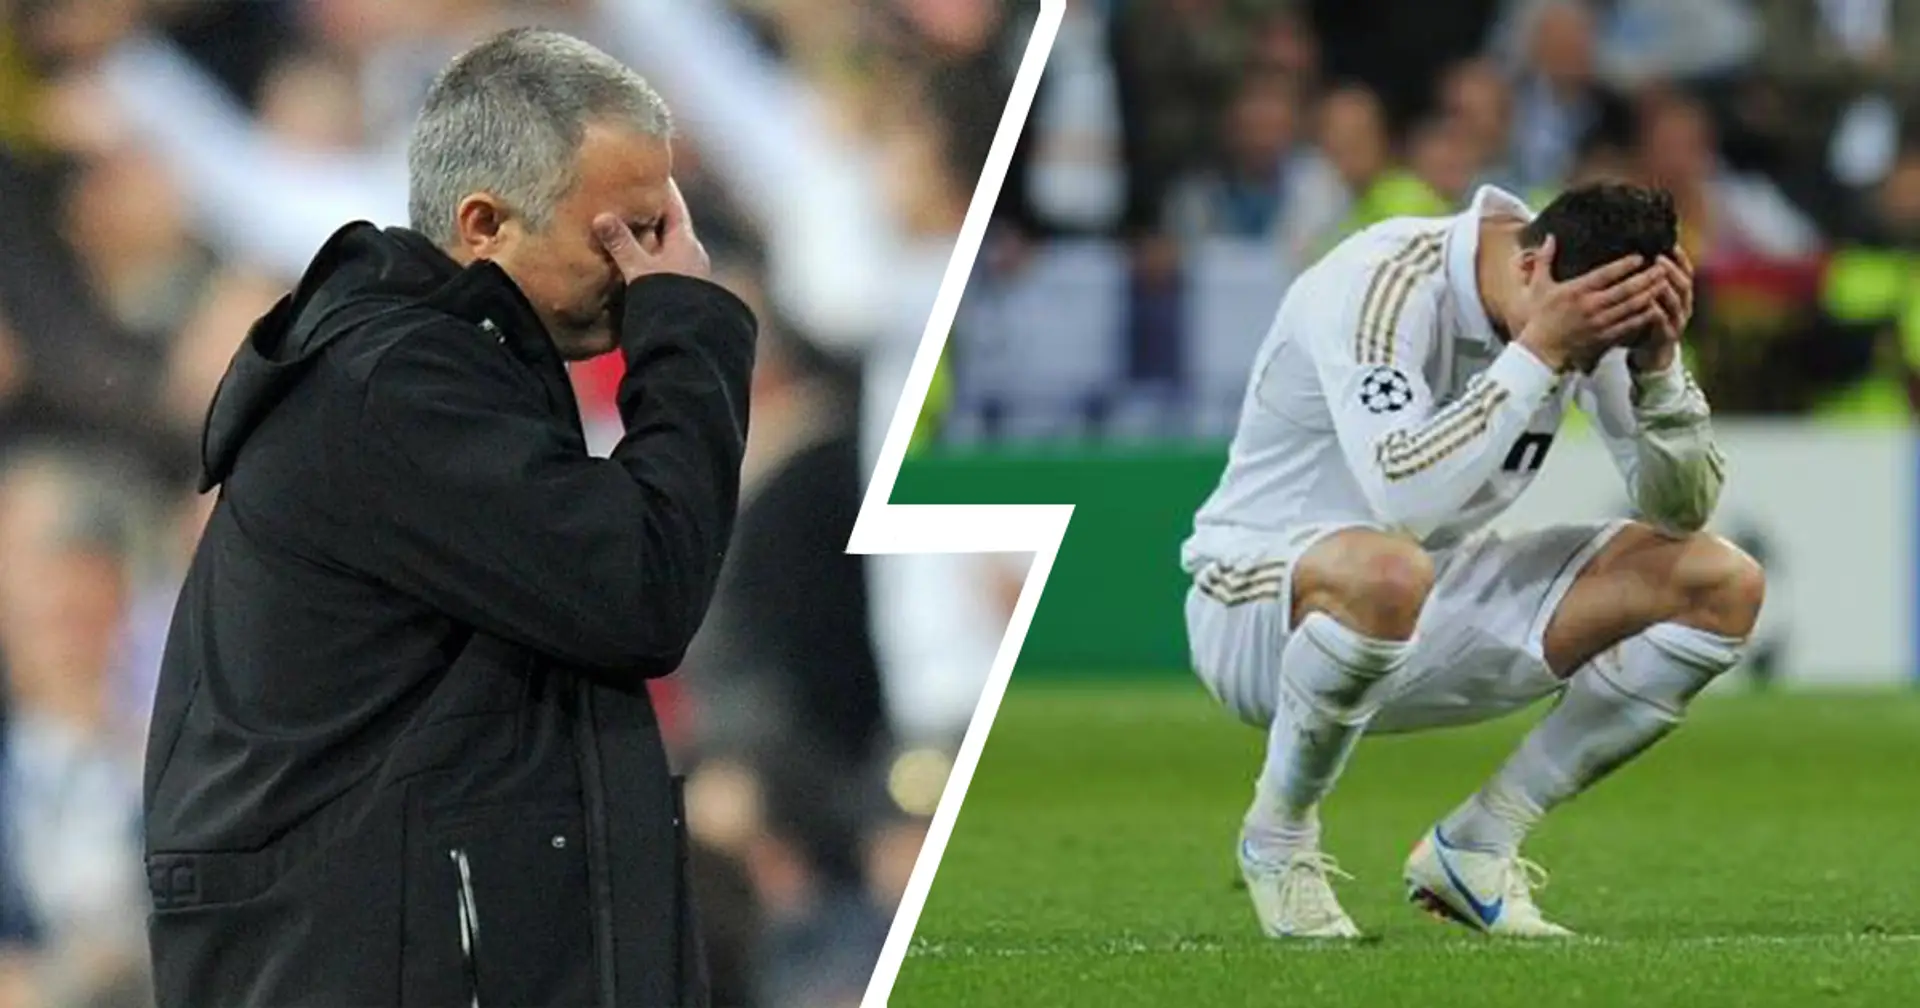 The only time I've cried after defeat': Mourinho has only bitter memories about 2012 CL quarterfinal vs Bayern - Football | Tribuna.com